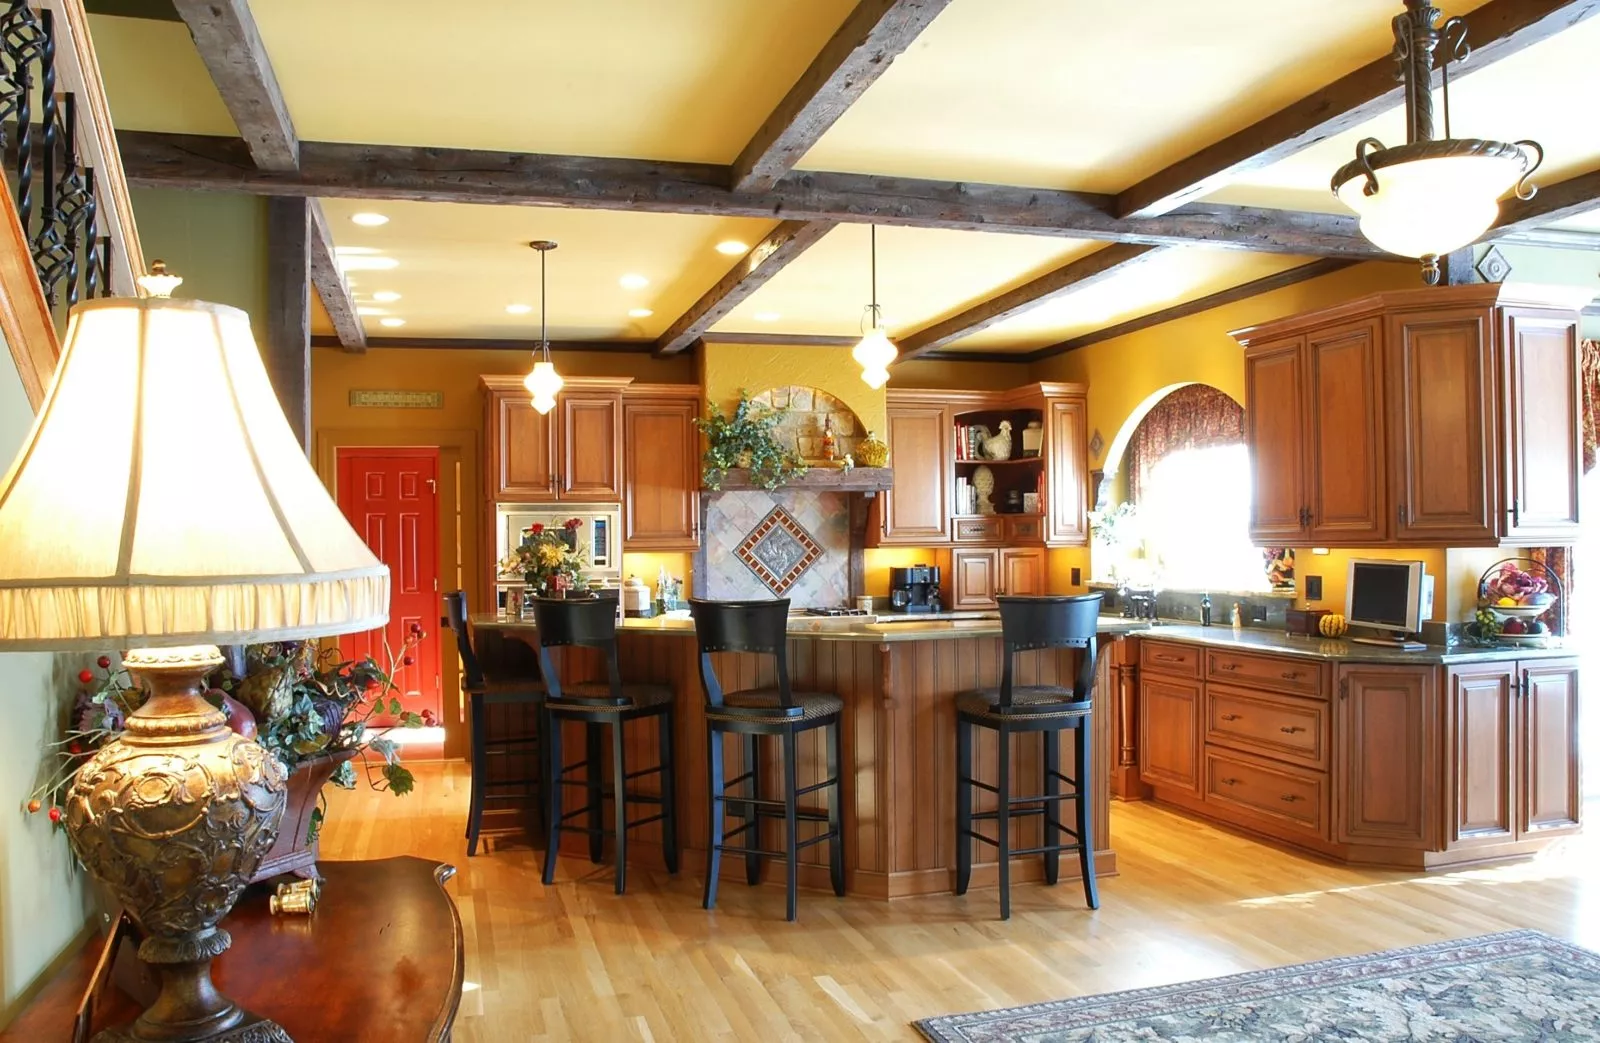 Kitchen remodeling in Naperville, IL. A rustic kitchen design with an island in Naperville.